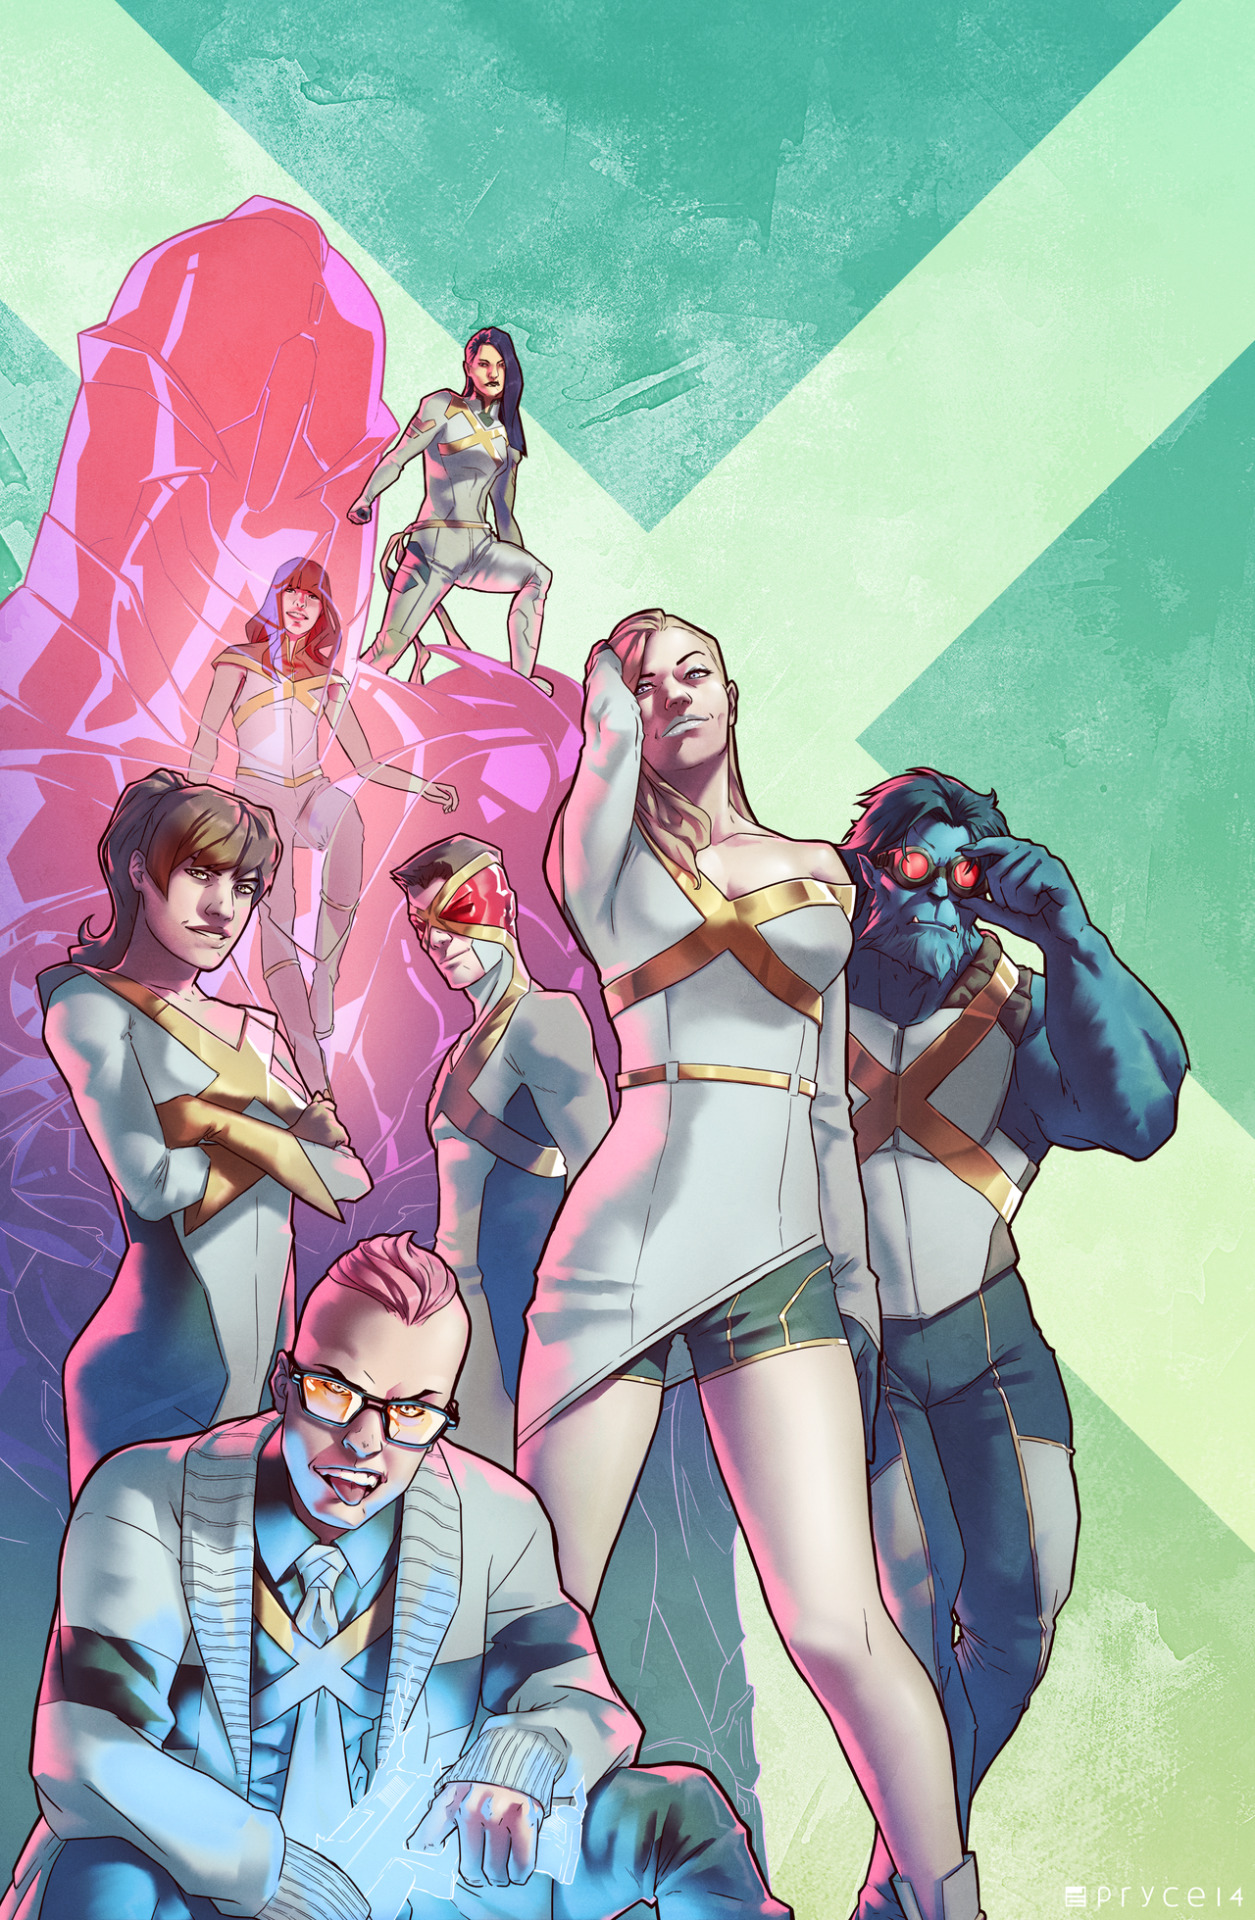 The Sensational X-Men by Pryce14
One of my dream X-men rosters.
This team would take a break from the mutant-mutant in-fighting, instead focusing on superheroing and forcing society to see mutants as heroes, whether it wants to or not.
Emma Frost and...